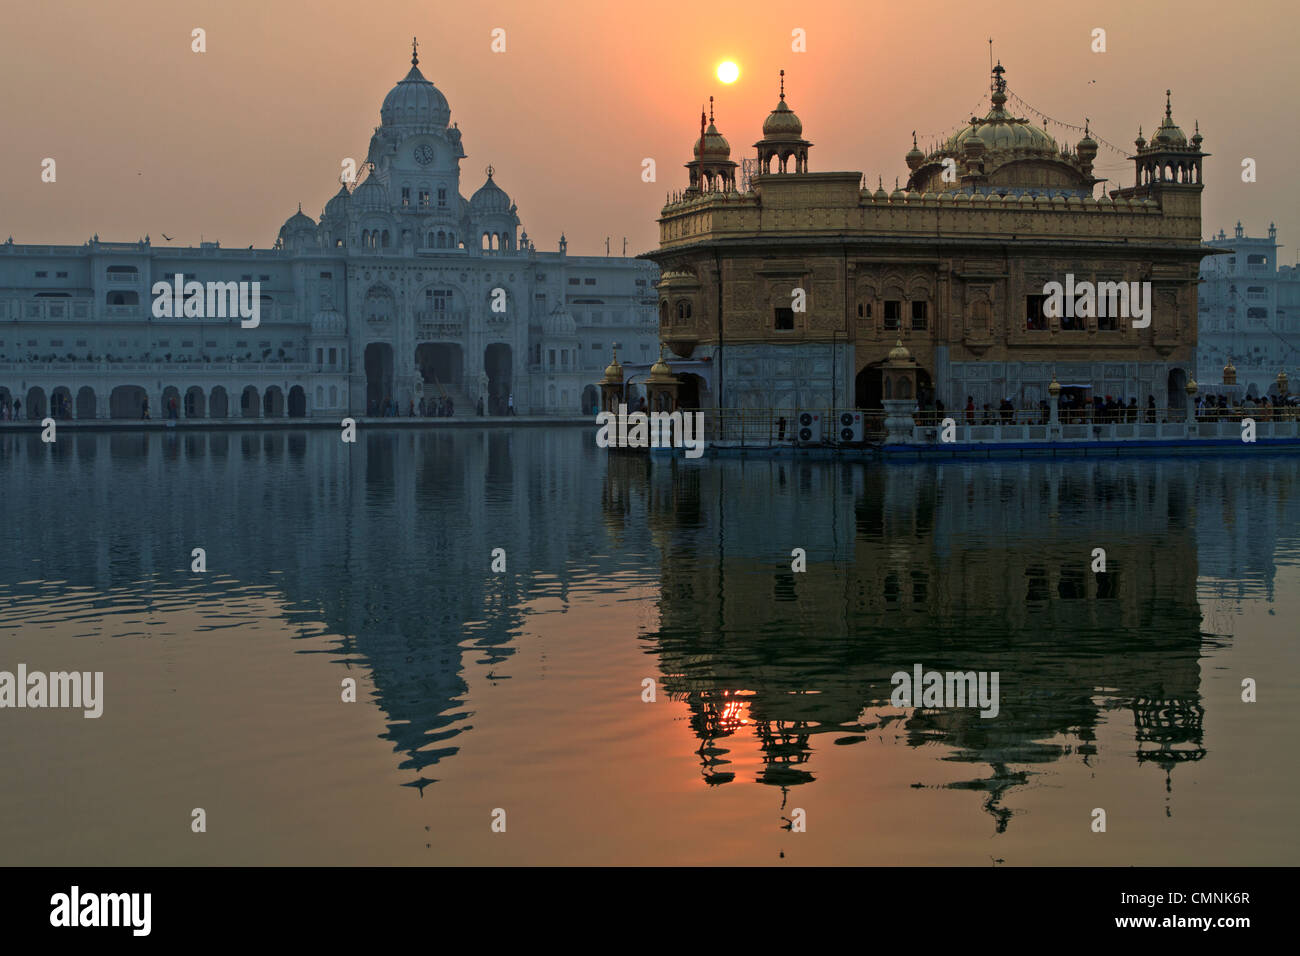 The Golden Temple, also known as Harmindar Sahib, the most sacred place of the Sikhs in Amritsar, Punjab, India. Stock Photo